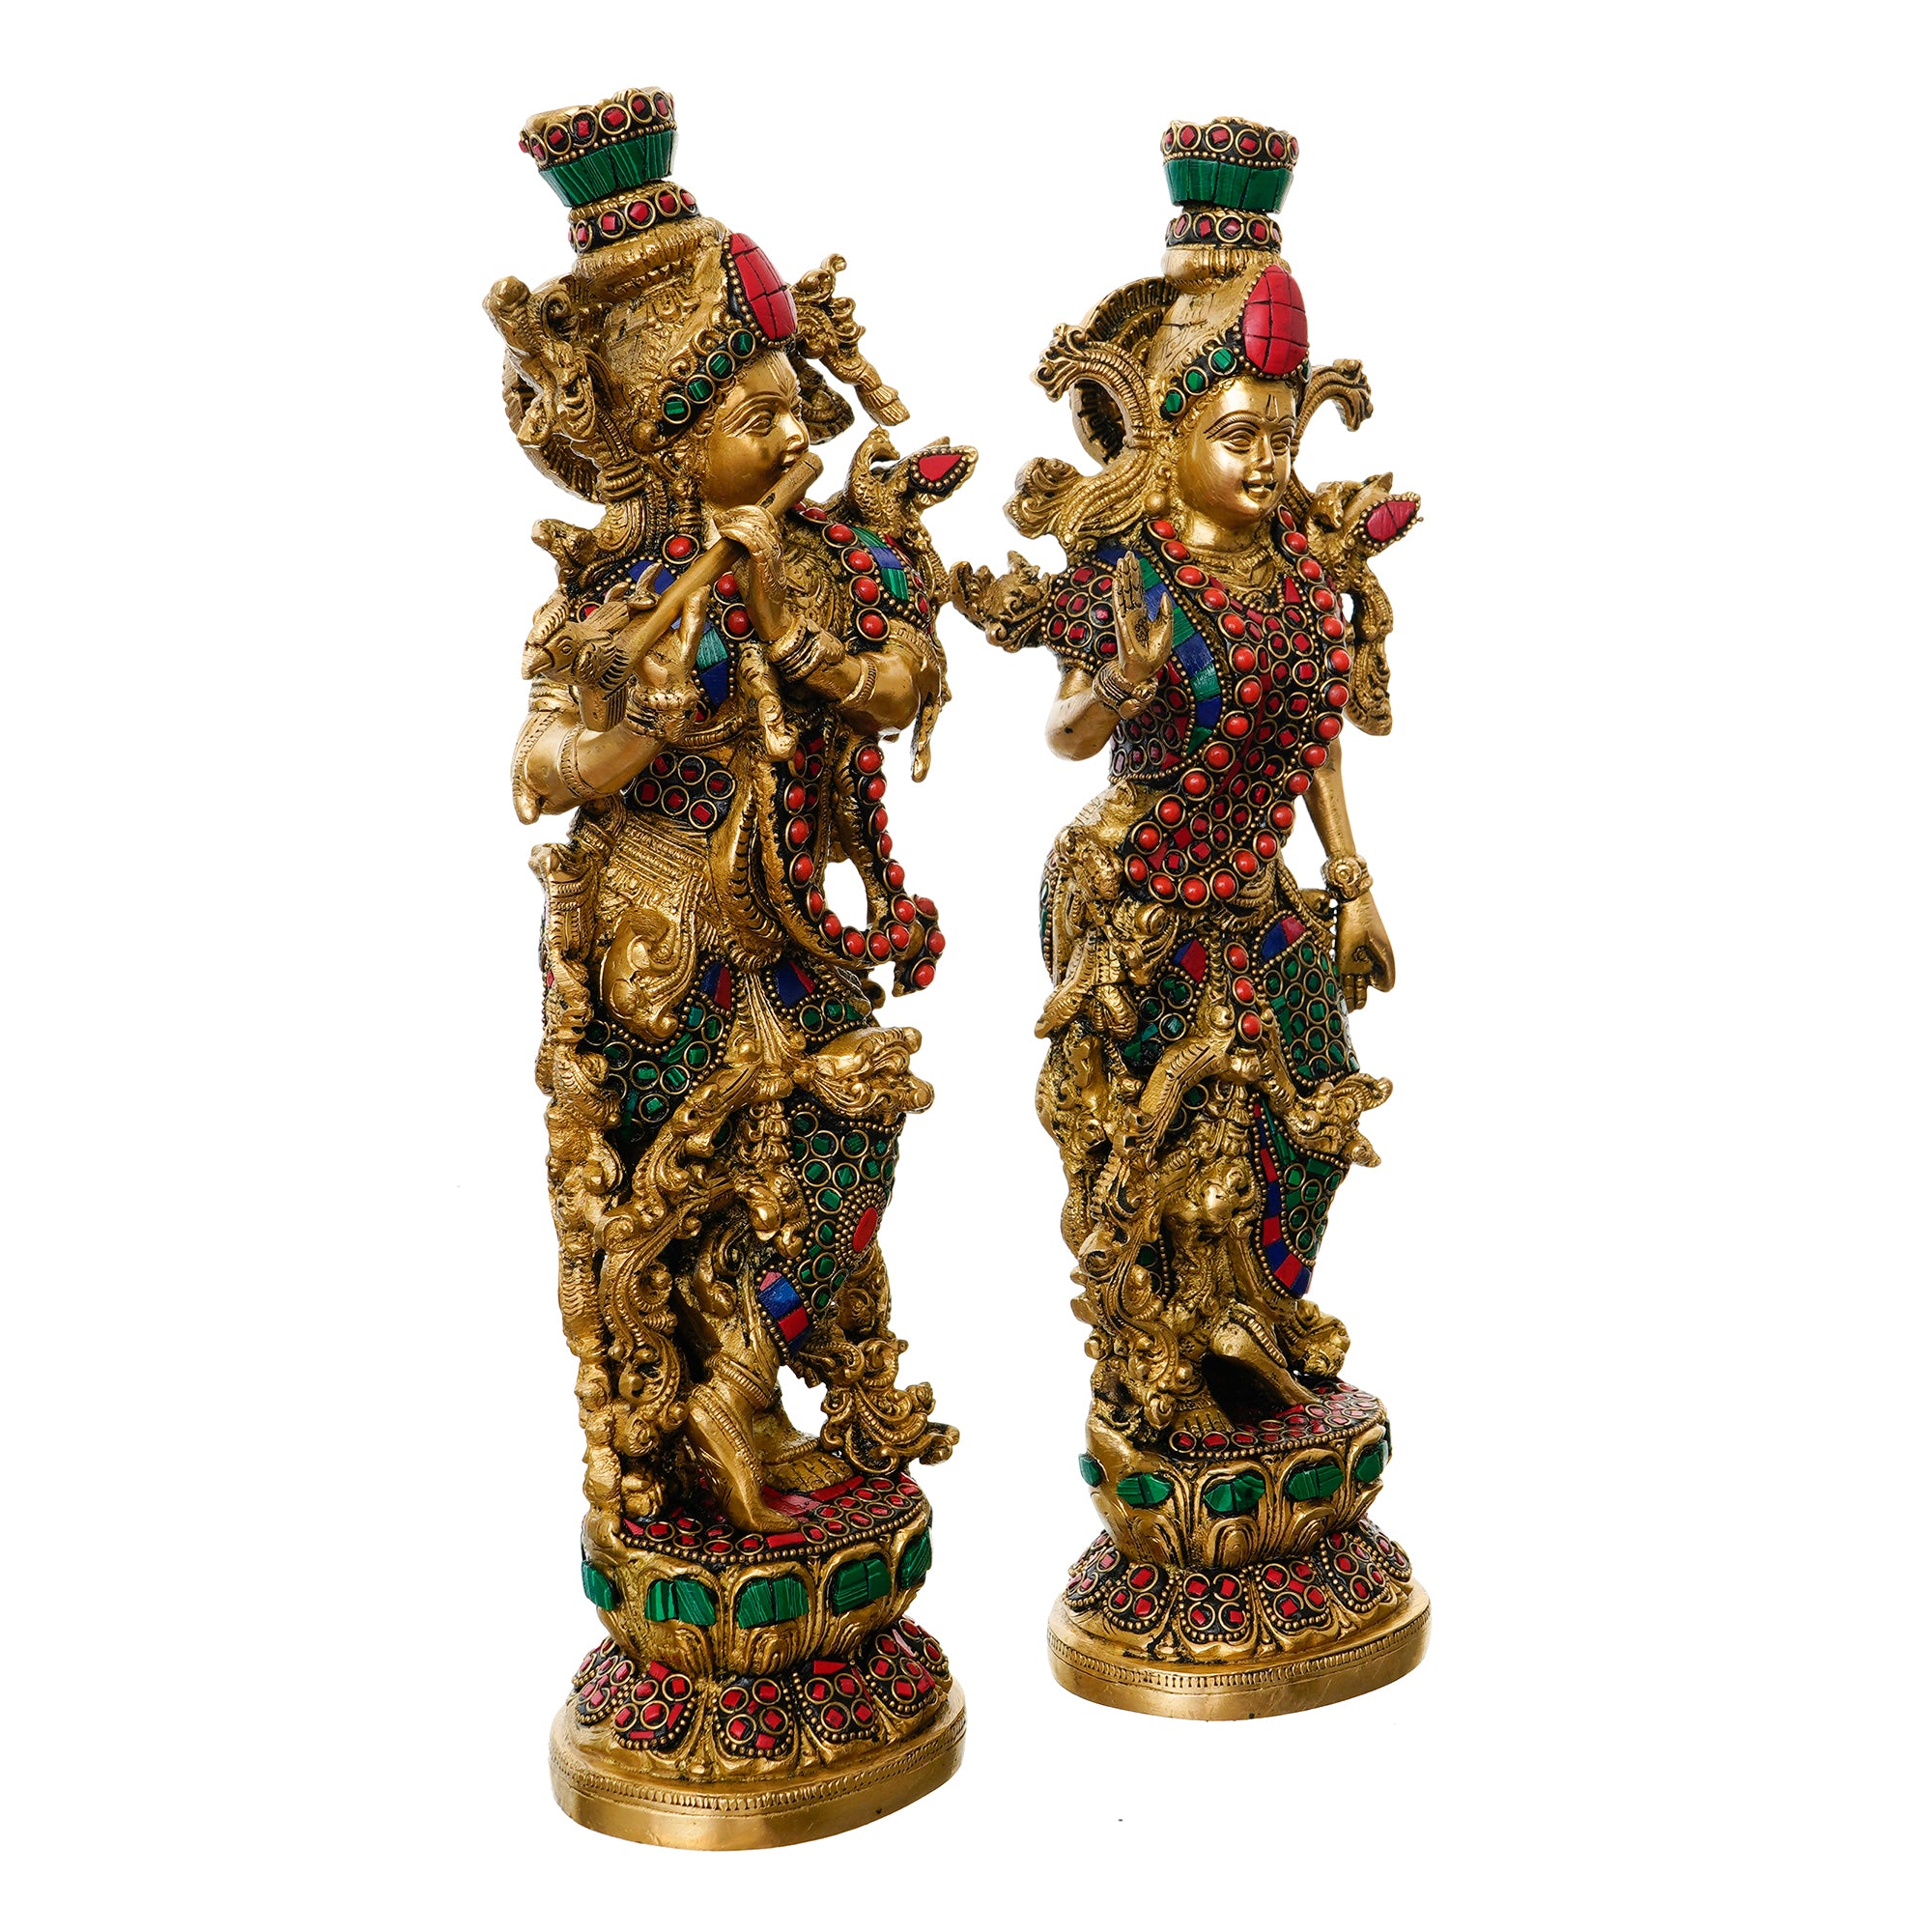 Golden Radha Krishna Playing Flute Handcrafted Brass Idol with Colorful Stone Work 5